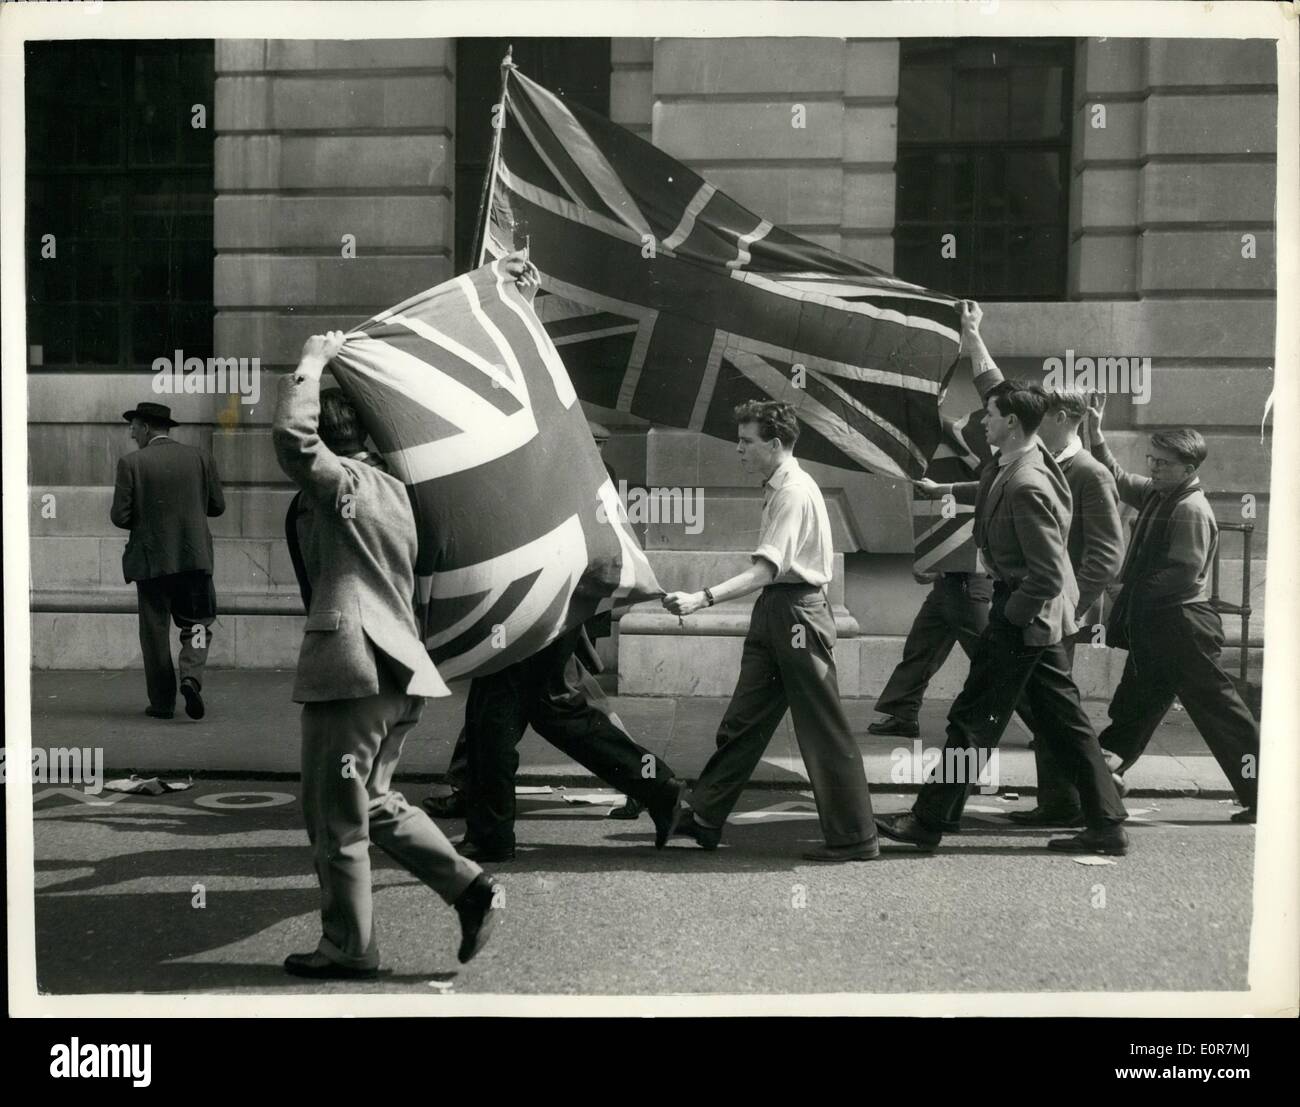 May 05, 1958 - Red Flag Flies From St.Pancras Town Hall. Students Demonstrates With Union Jacks. The Socialist majority on St, Pancras Borough Council decided last night to fly the Red Flag over St.Pancras Town Hall and to give all Council workers the day off. Students carrying Union Jacks demonstrated outside the Town Hall. keystone Photo show:- Students carry Union Jacks as they demonstrate outside St.Pancras Town Hall. Stock Photo